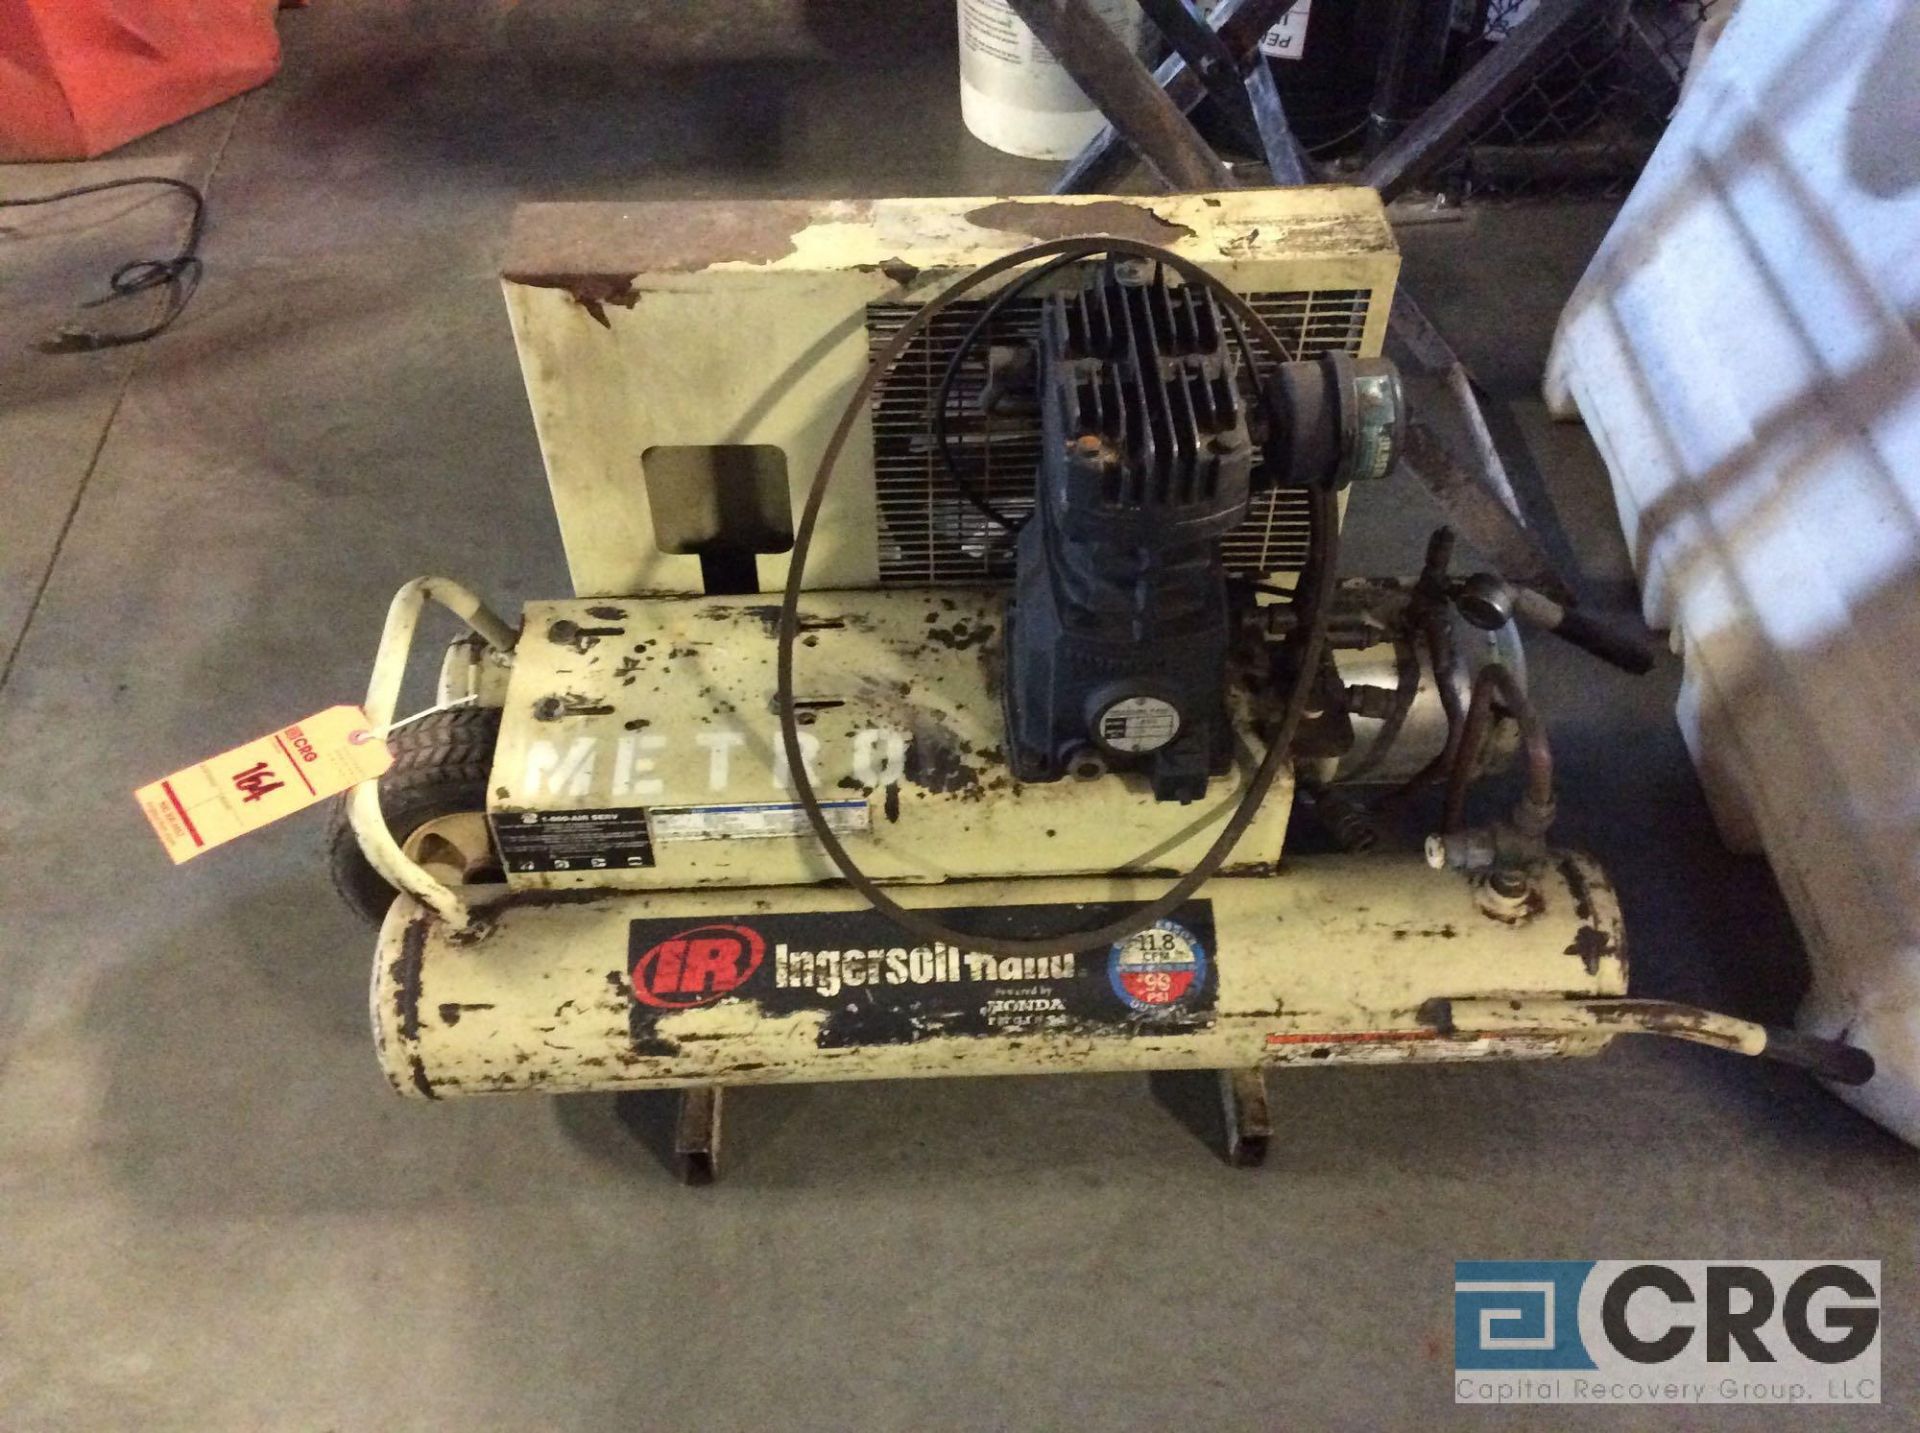 Ingersoll Rand portable air compressor (MISSING MOTOR) (LOCATED INDUSTRIAL COURT INSIDE)